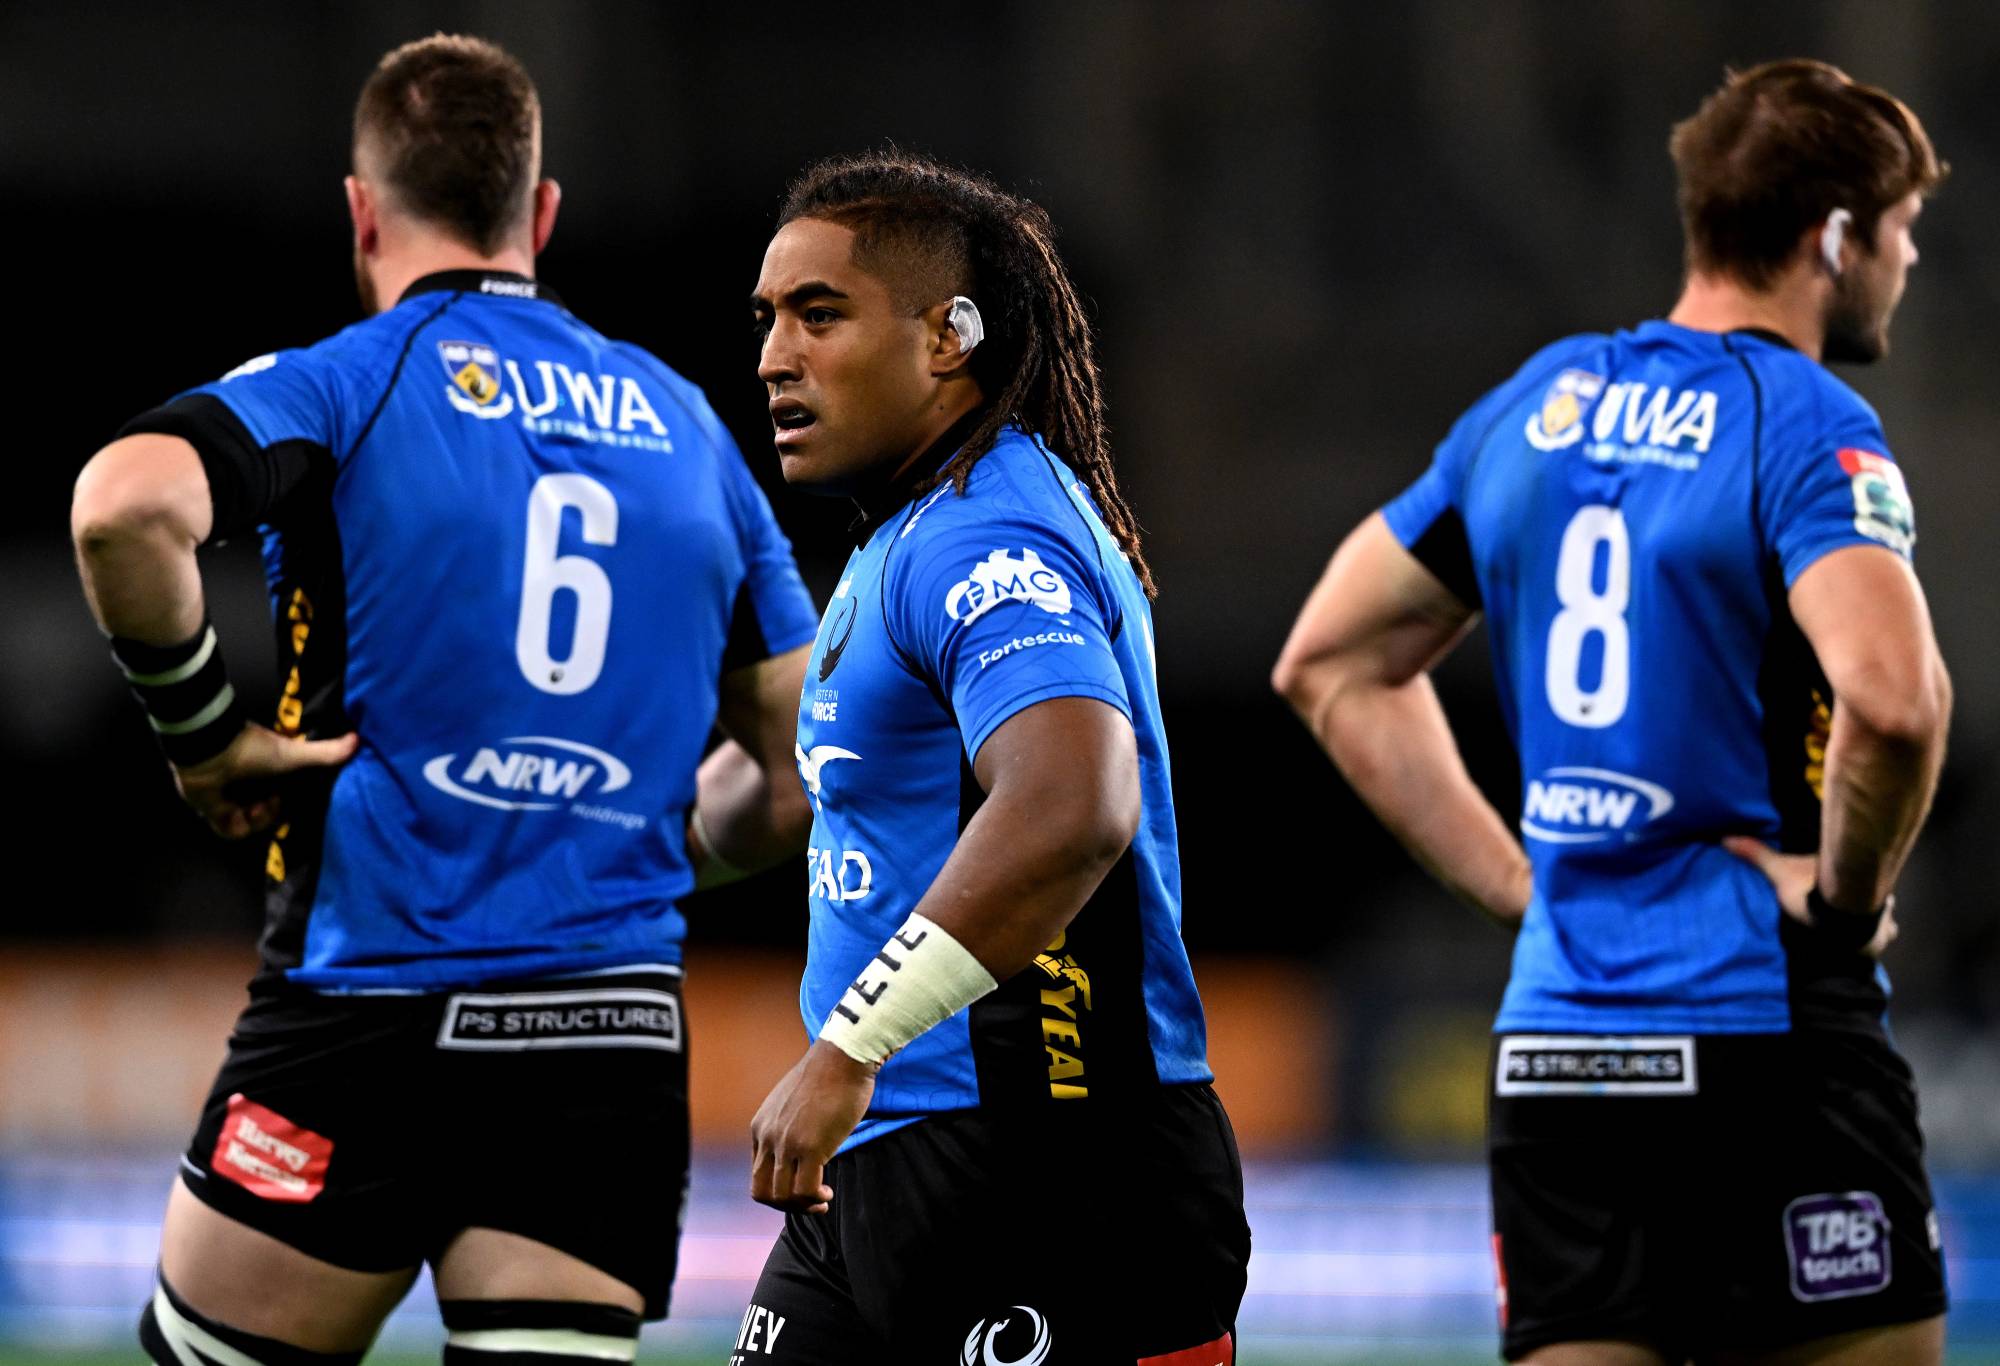 Feleti Kaitu'u of the Force looks on during the round 13 Super Rugby Pacific match between the Highlanders and the Western Force at Forsyth Barr Stadium on May 13, 2022 in Dunedin, New Zealand. (Photo by Joe Allison/Getty Images)